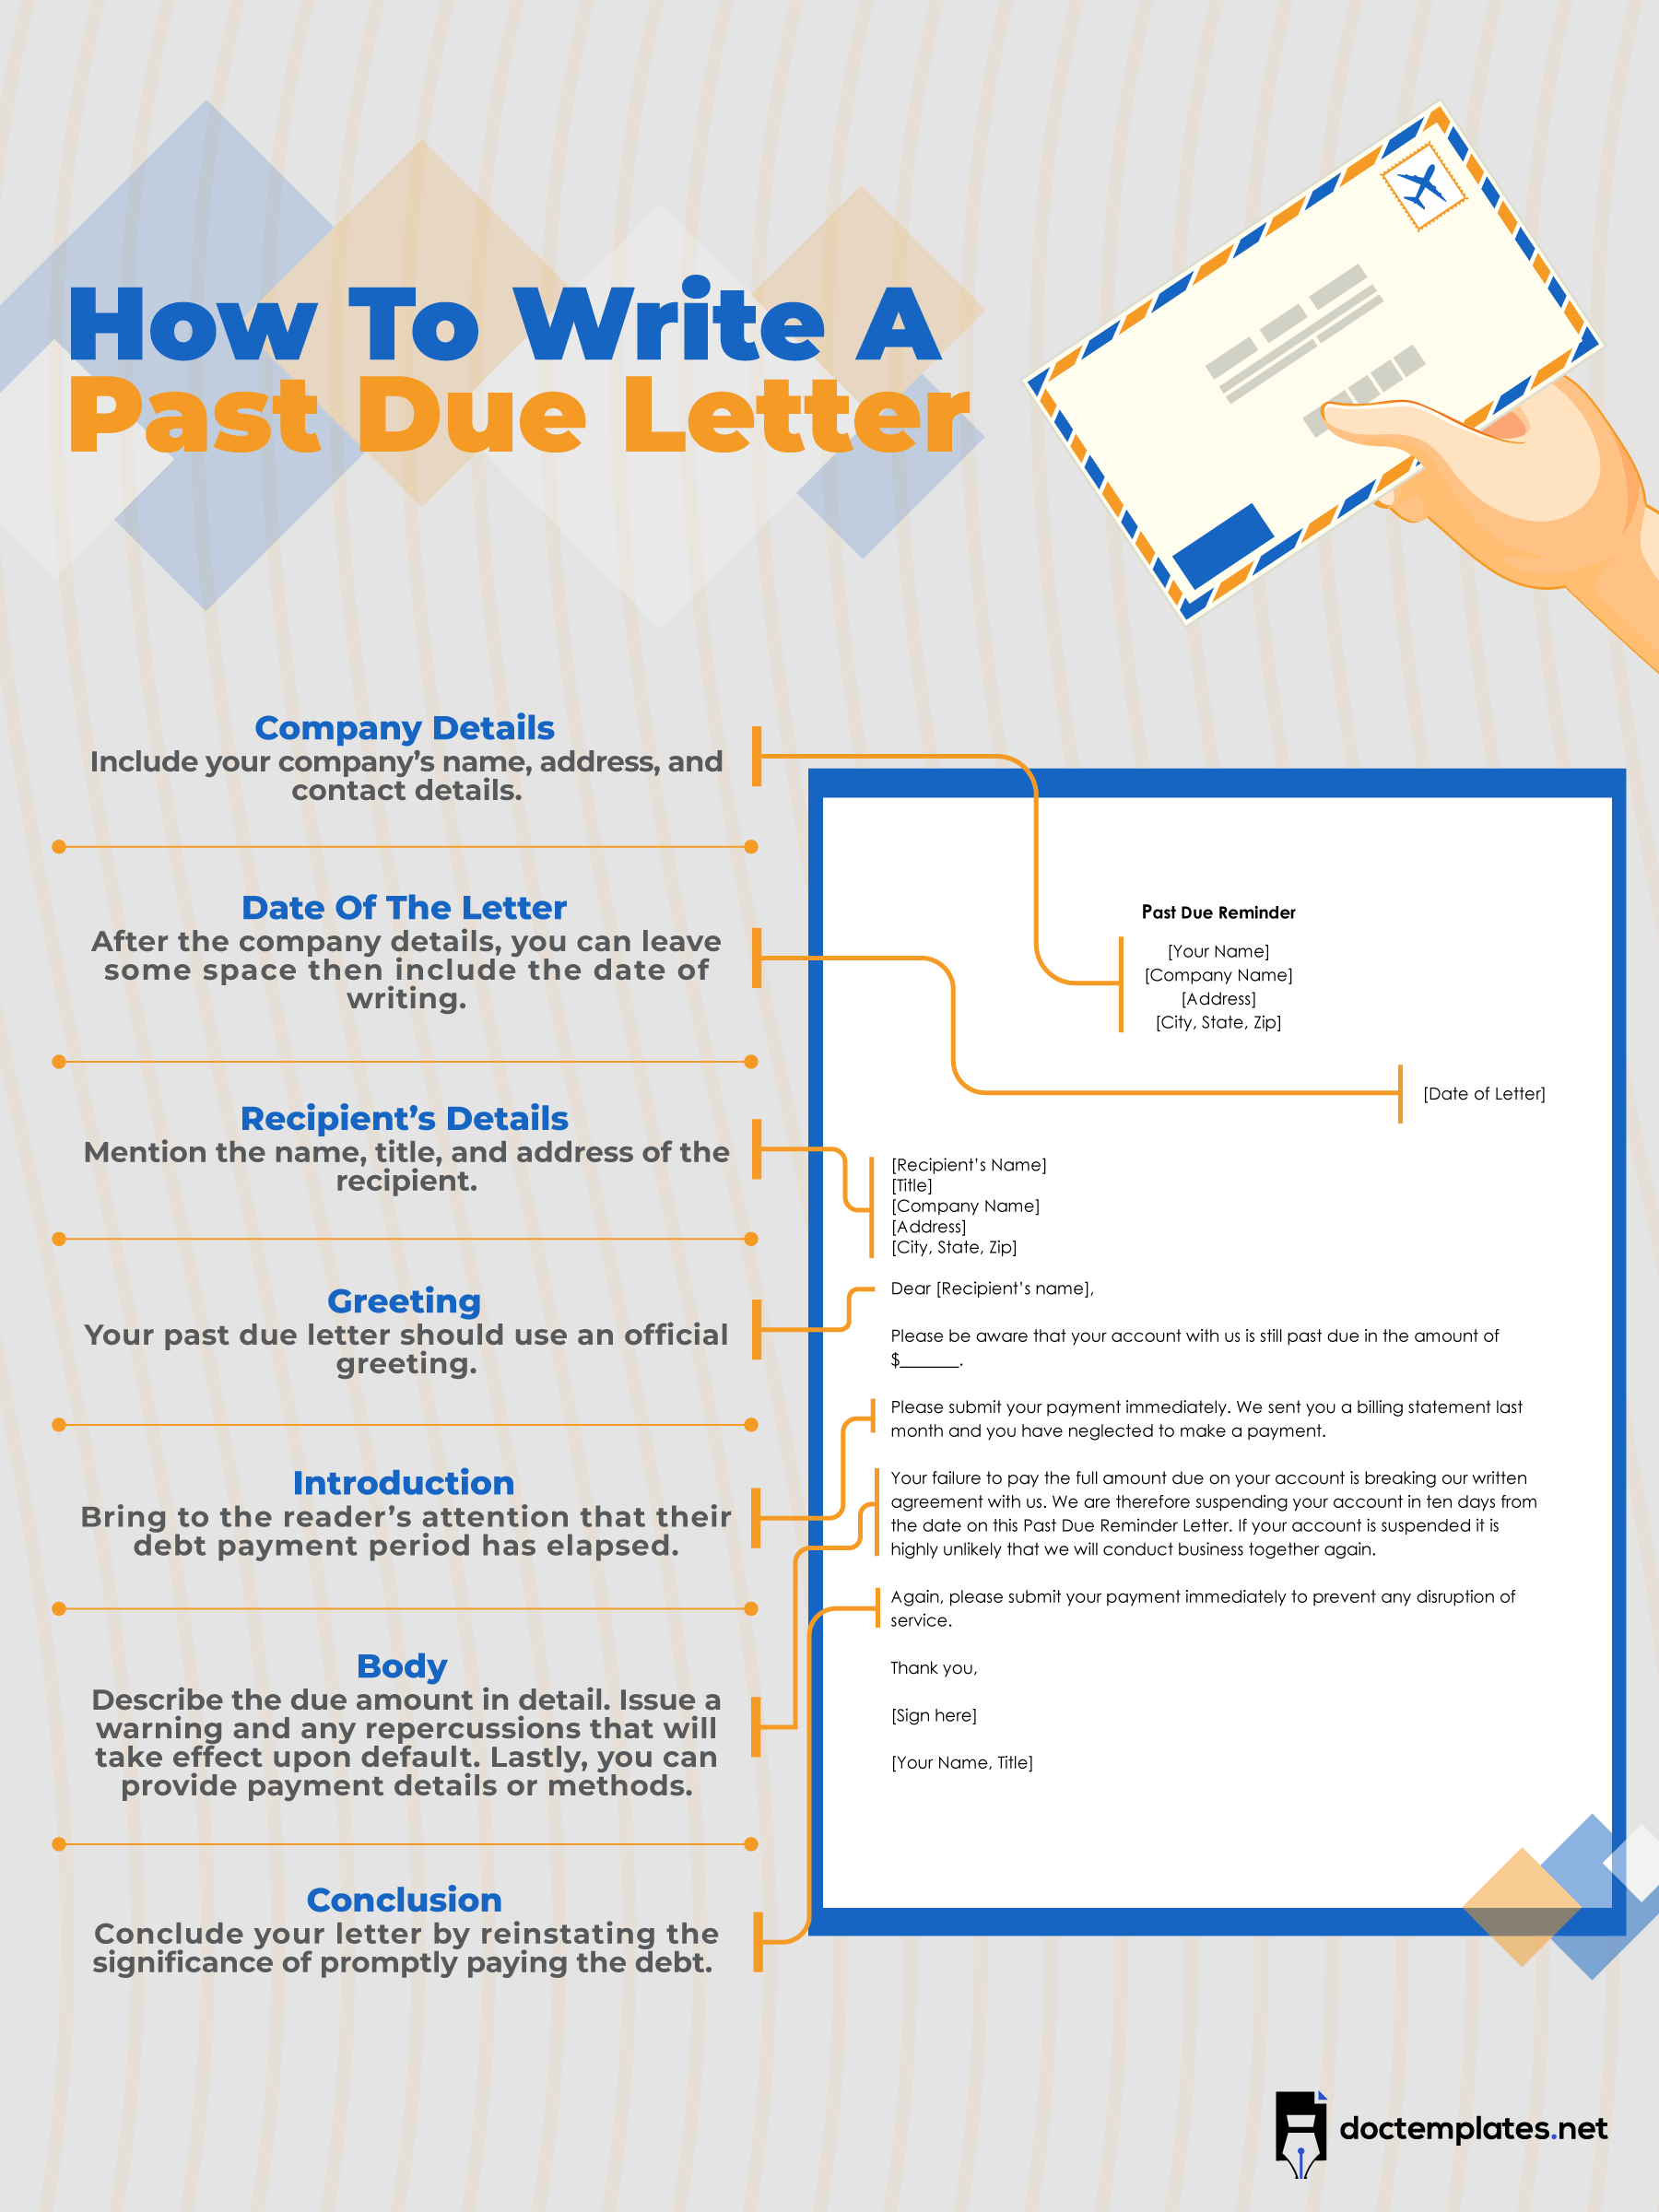 This infographic is about writing past due letter.